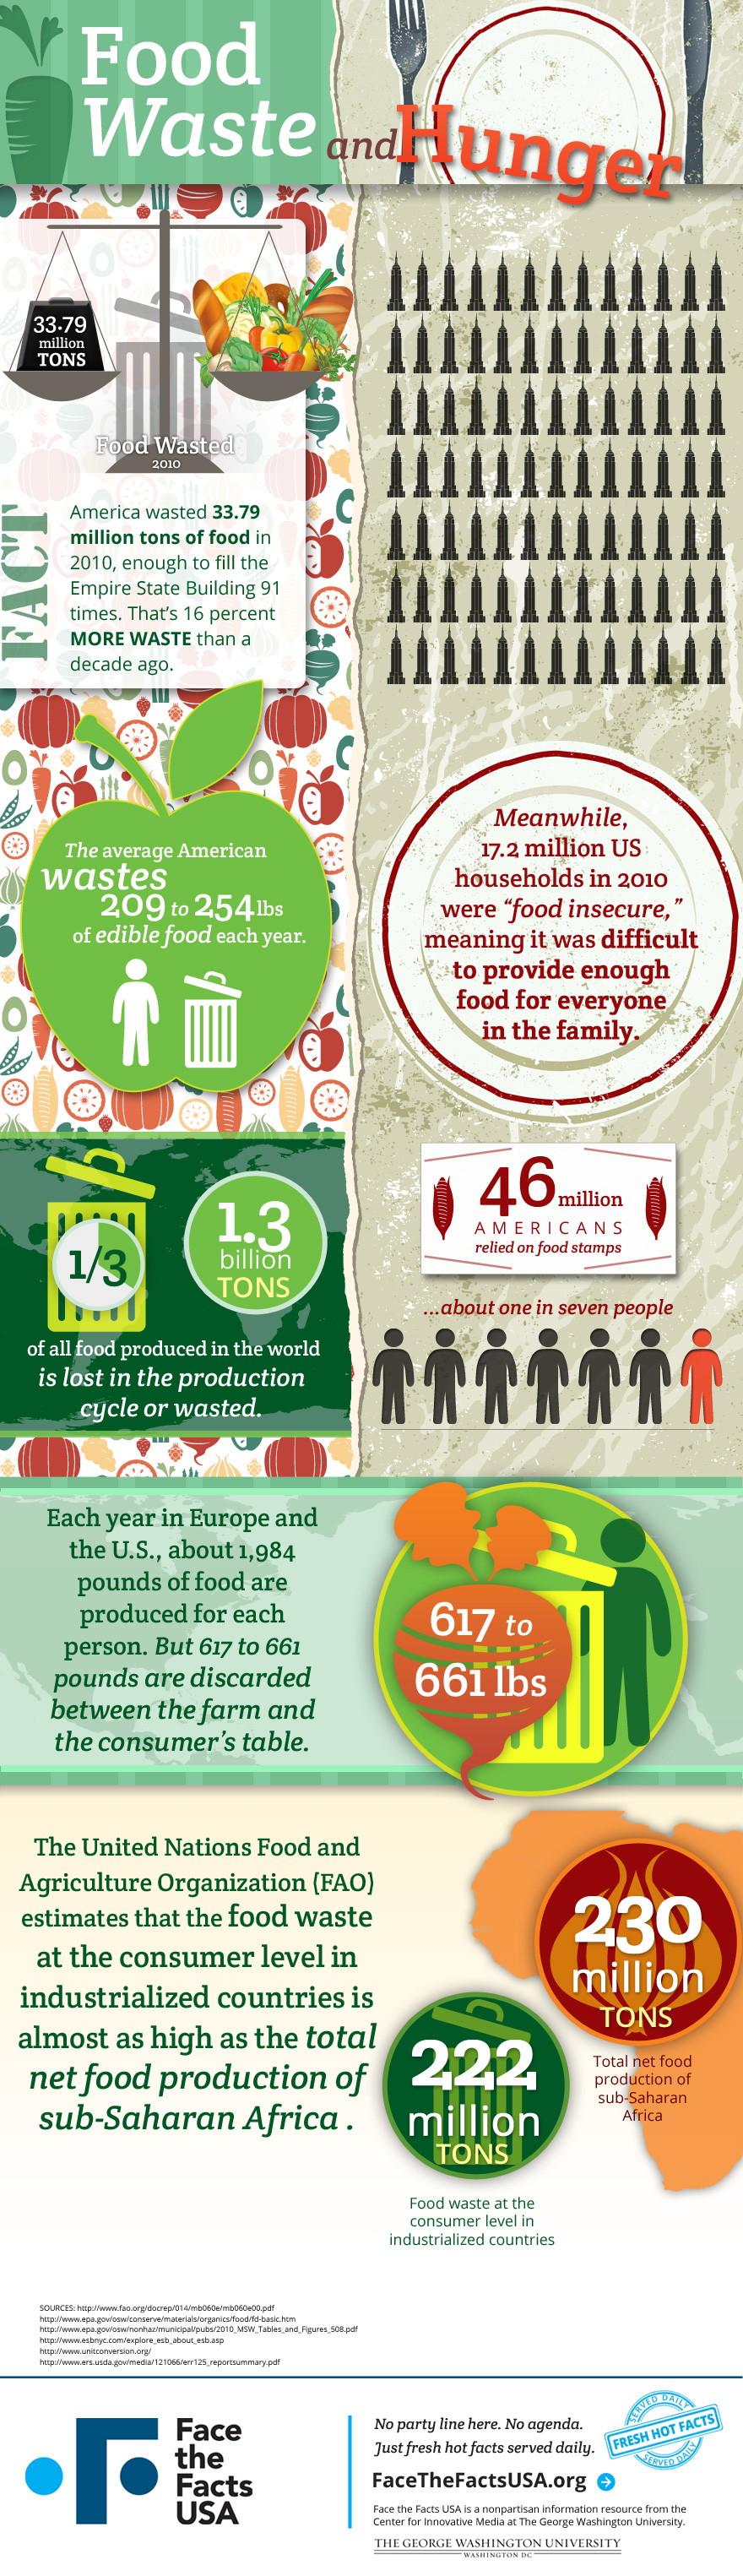 image taken from: http://www.facethefactsusa.org/facts/supersized-hunger-pangs-supersized-waste-infographic